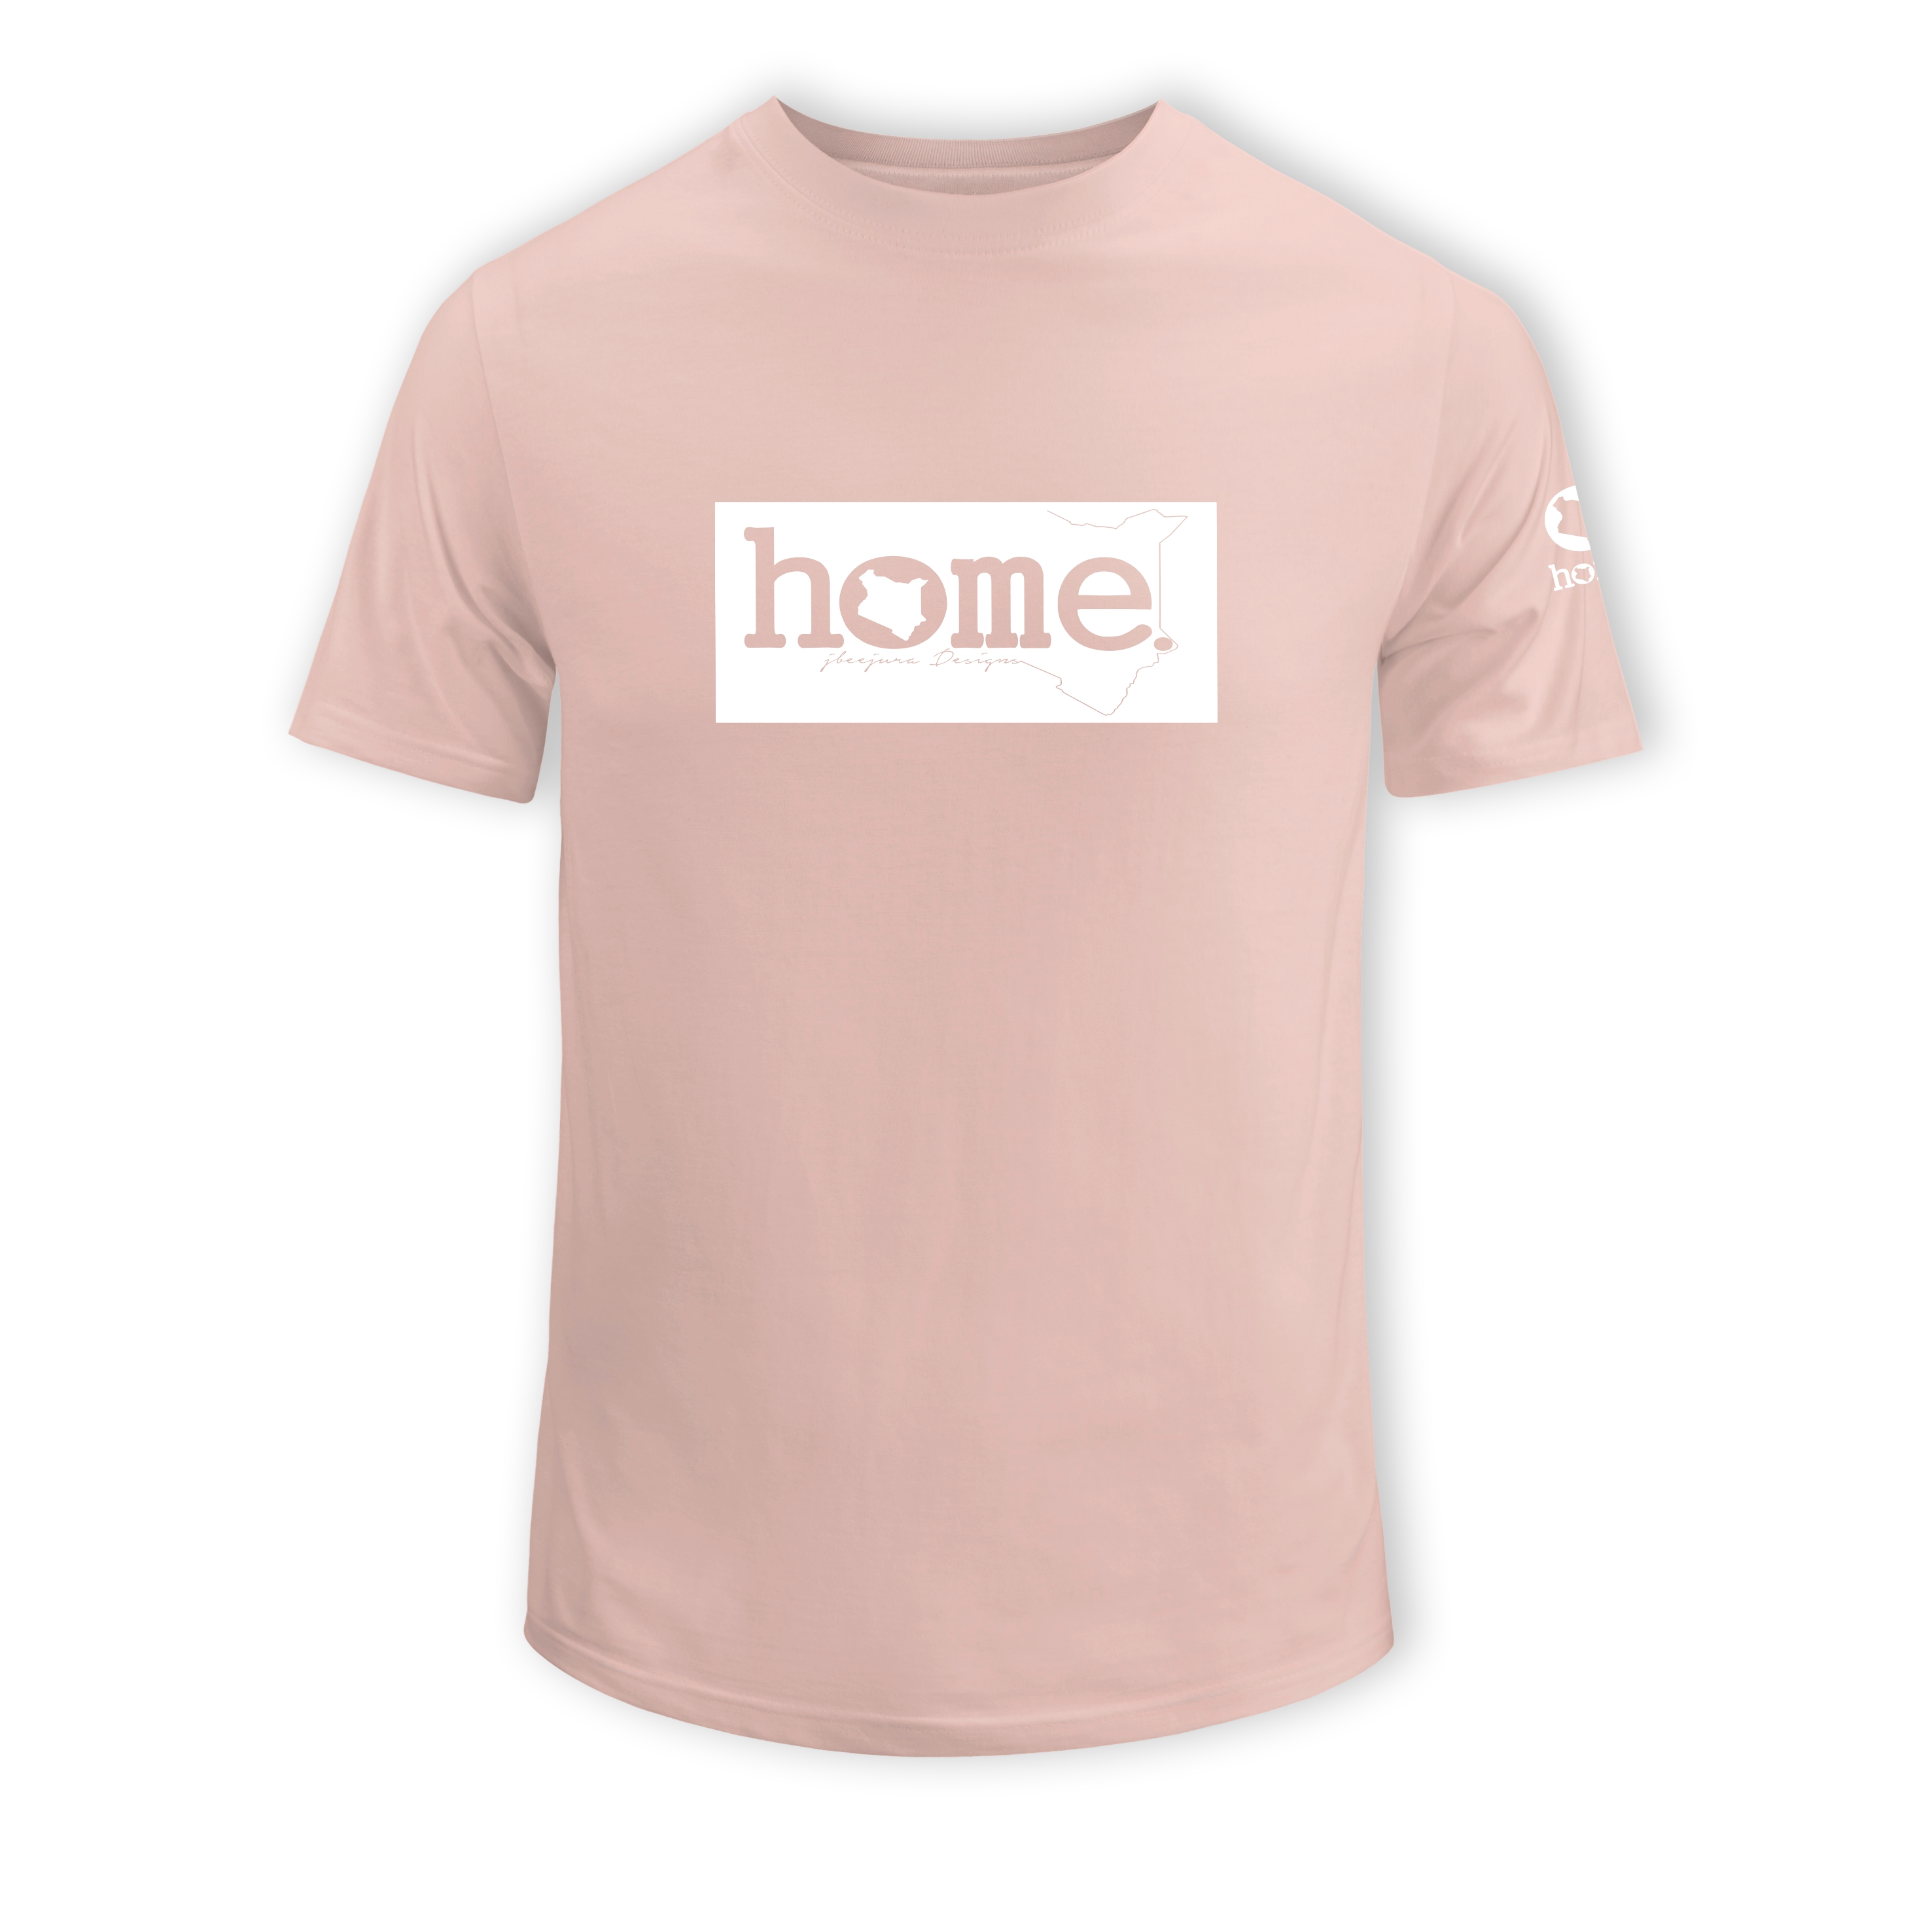 home_254 SHORT-SLEEVED PEACH T-SHIRT WITH A WHITE CLASSIC PRINT – COTTON PLUS FABRIC